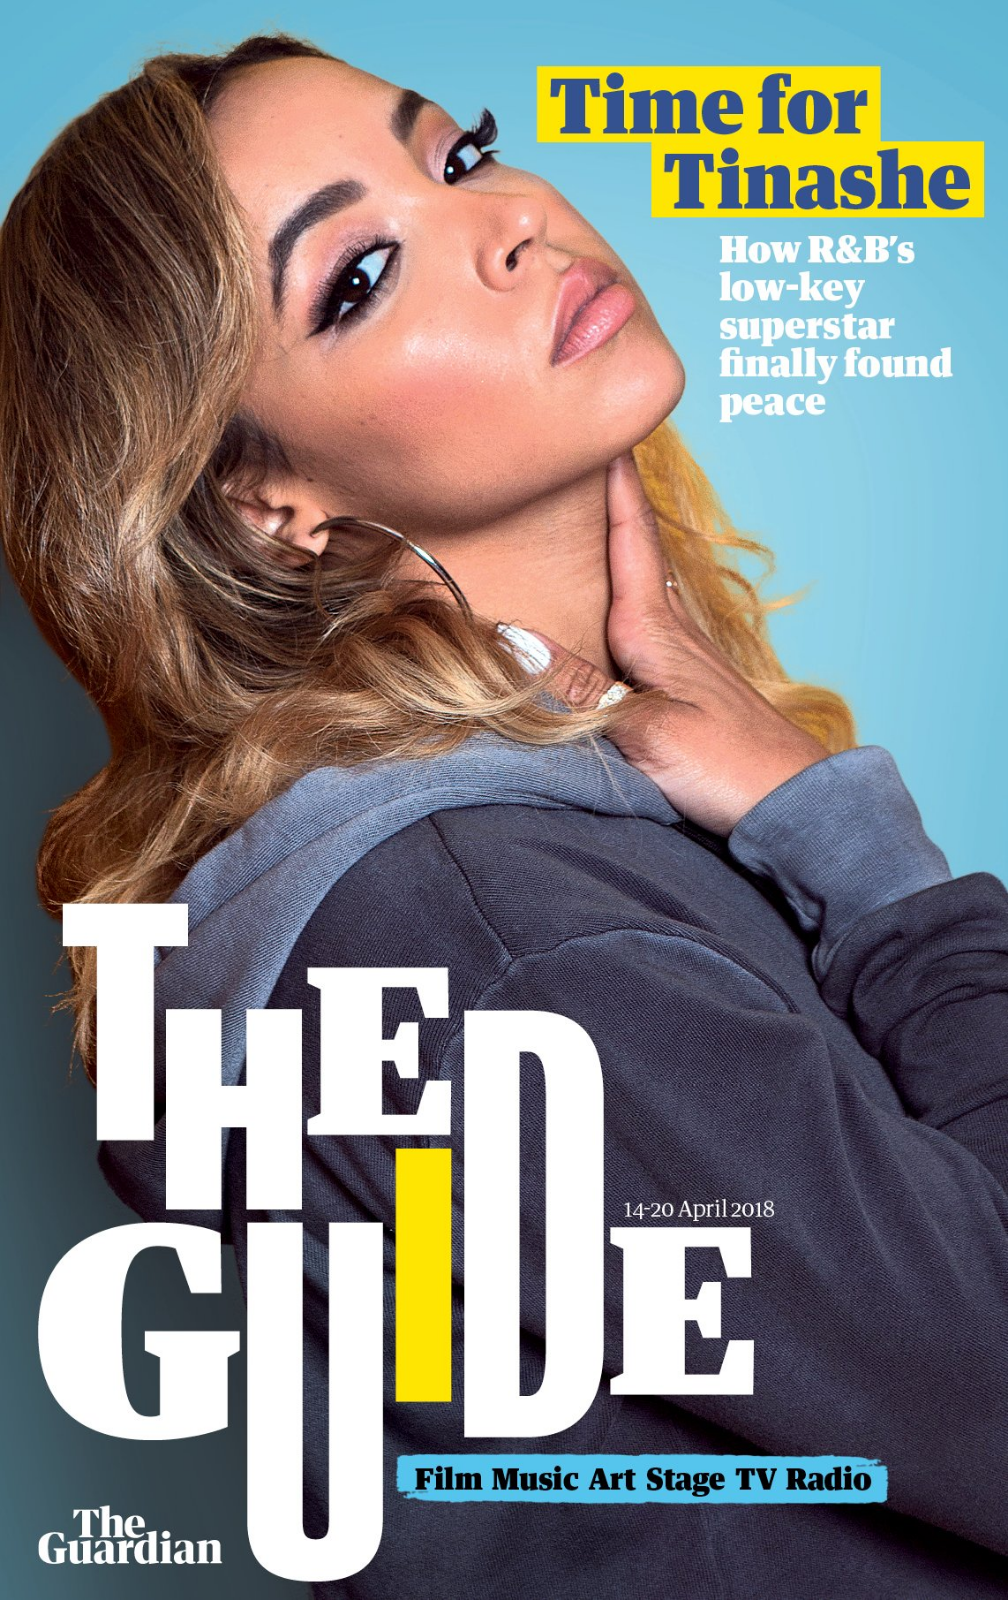 GUIDE Magazine 10 March 2018 TINASHE COVER STORY